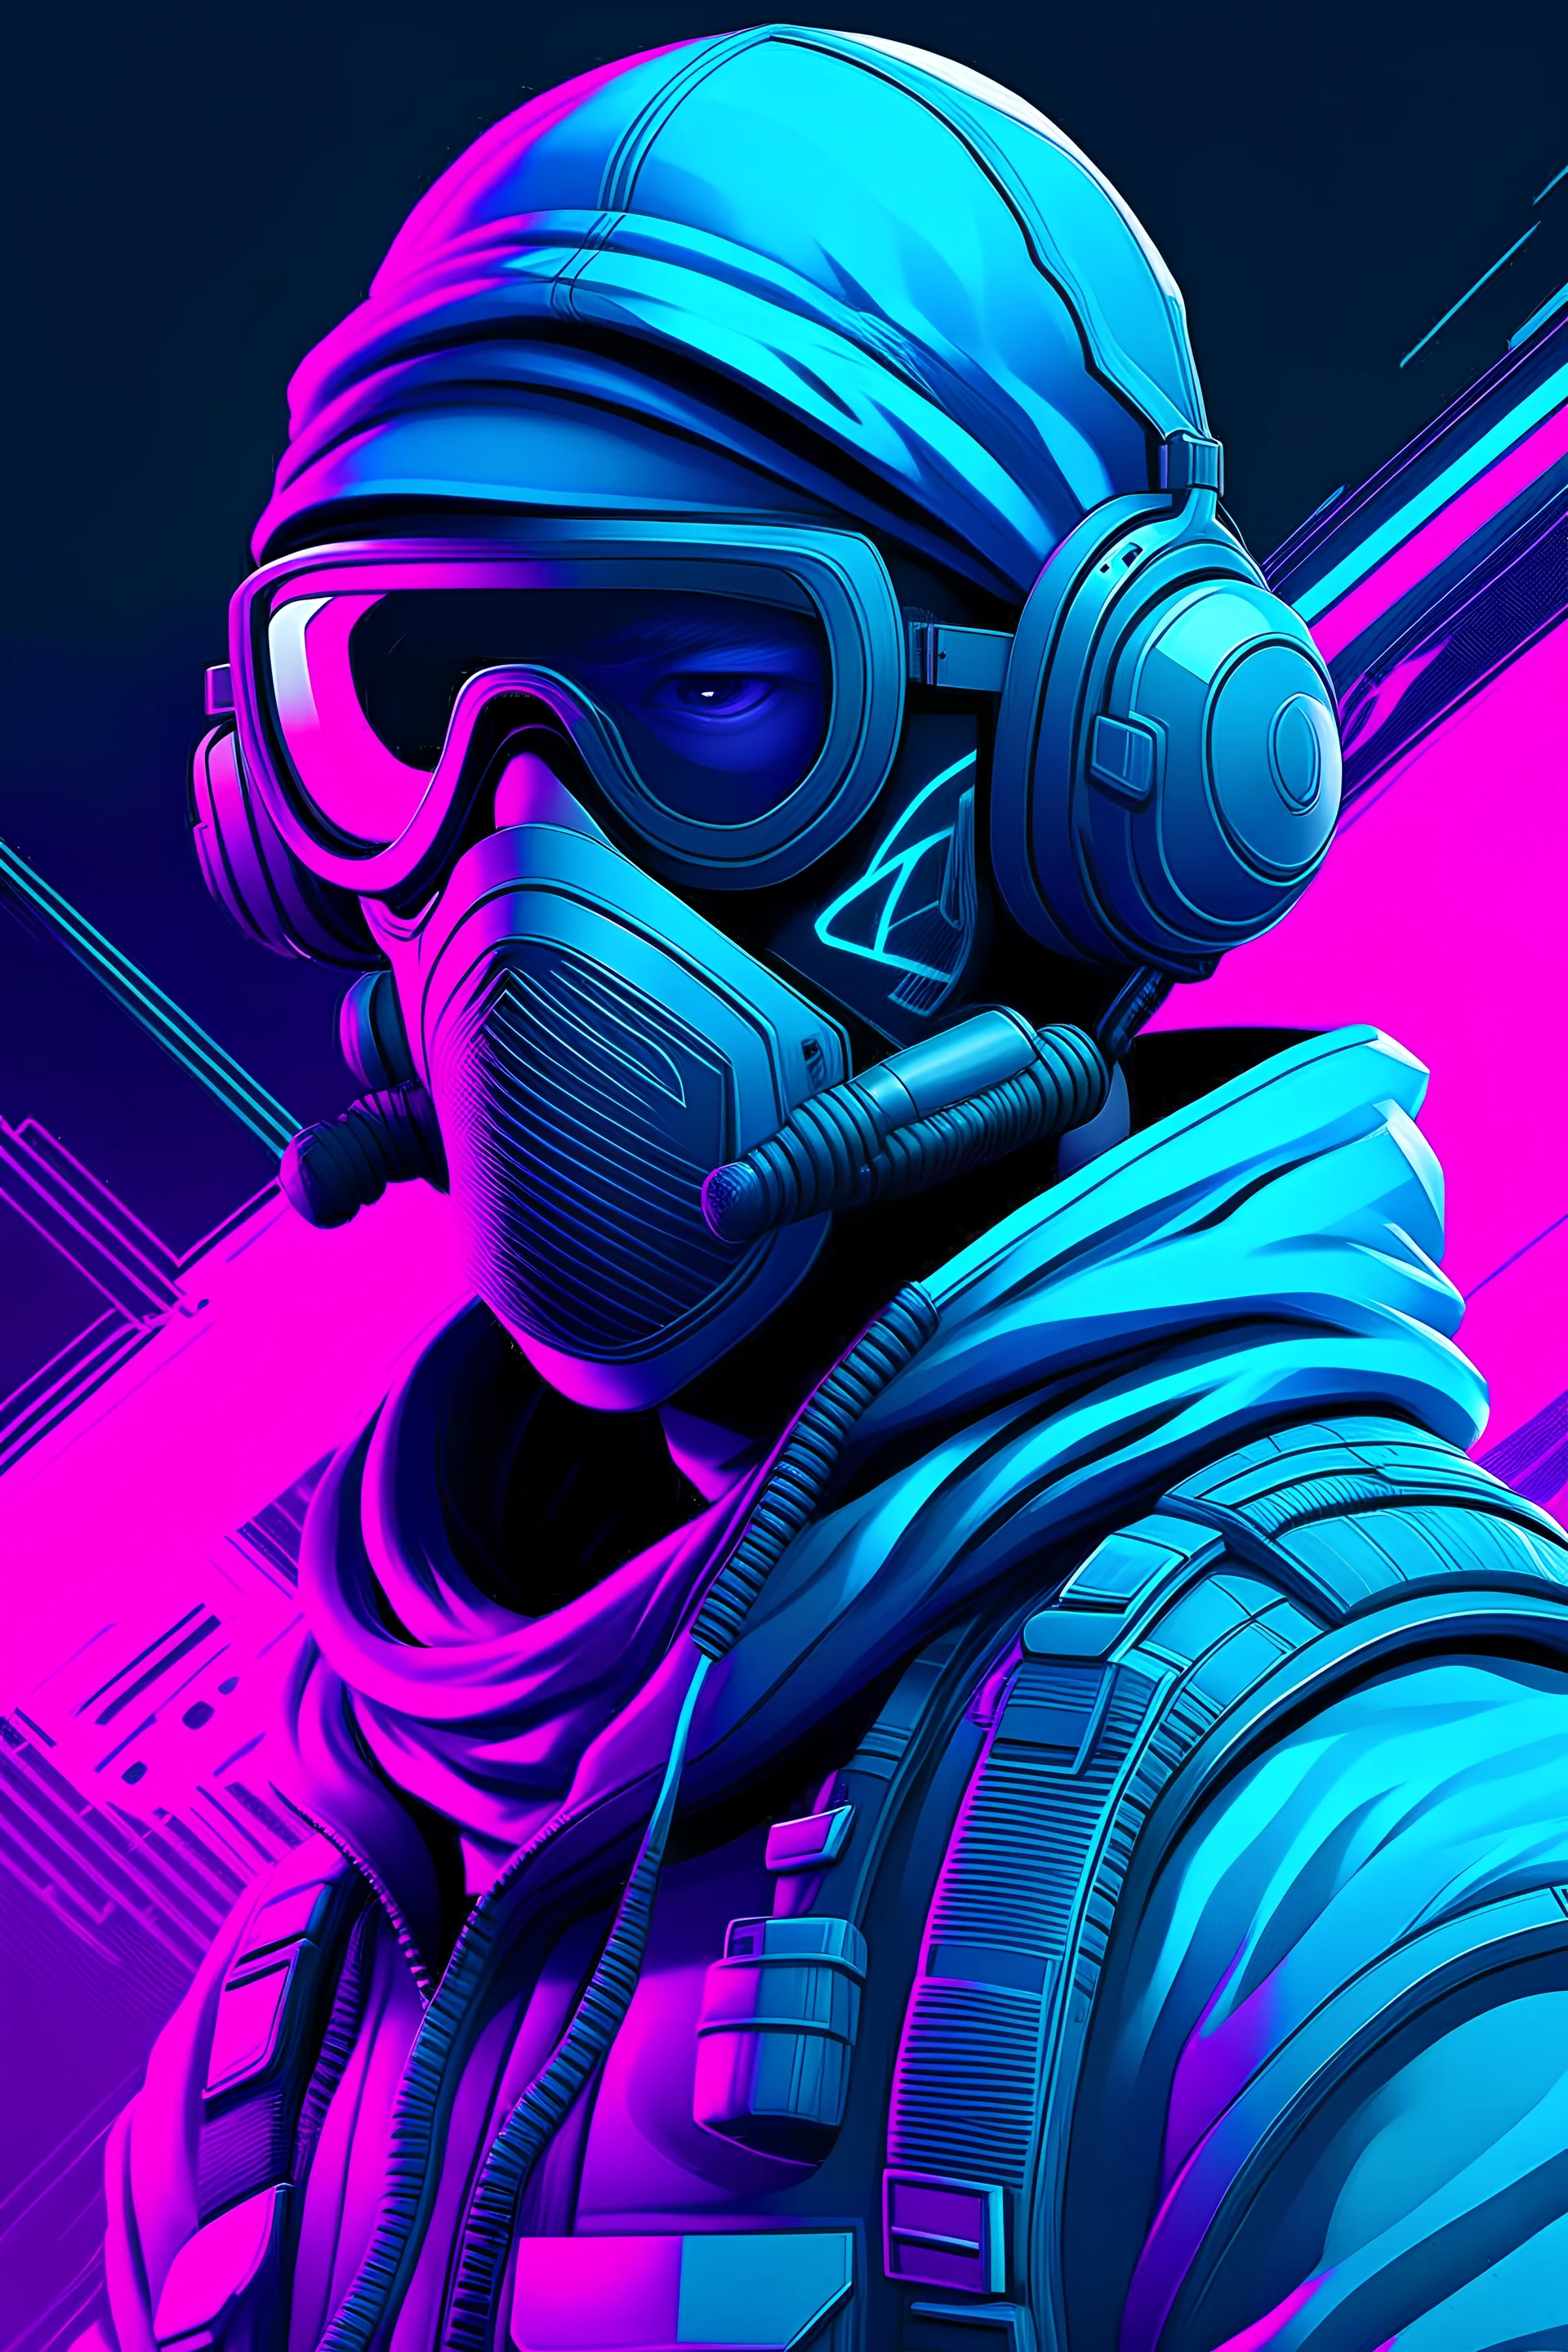 Gaming profile that resembles call of duty ghost and gta with only colors of purple and cyan